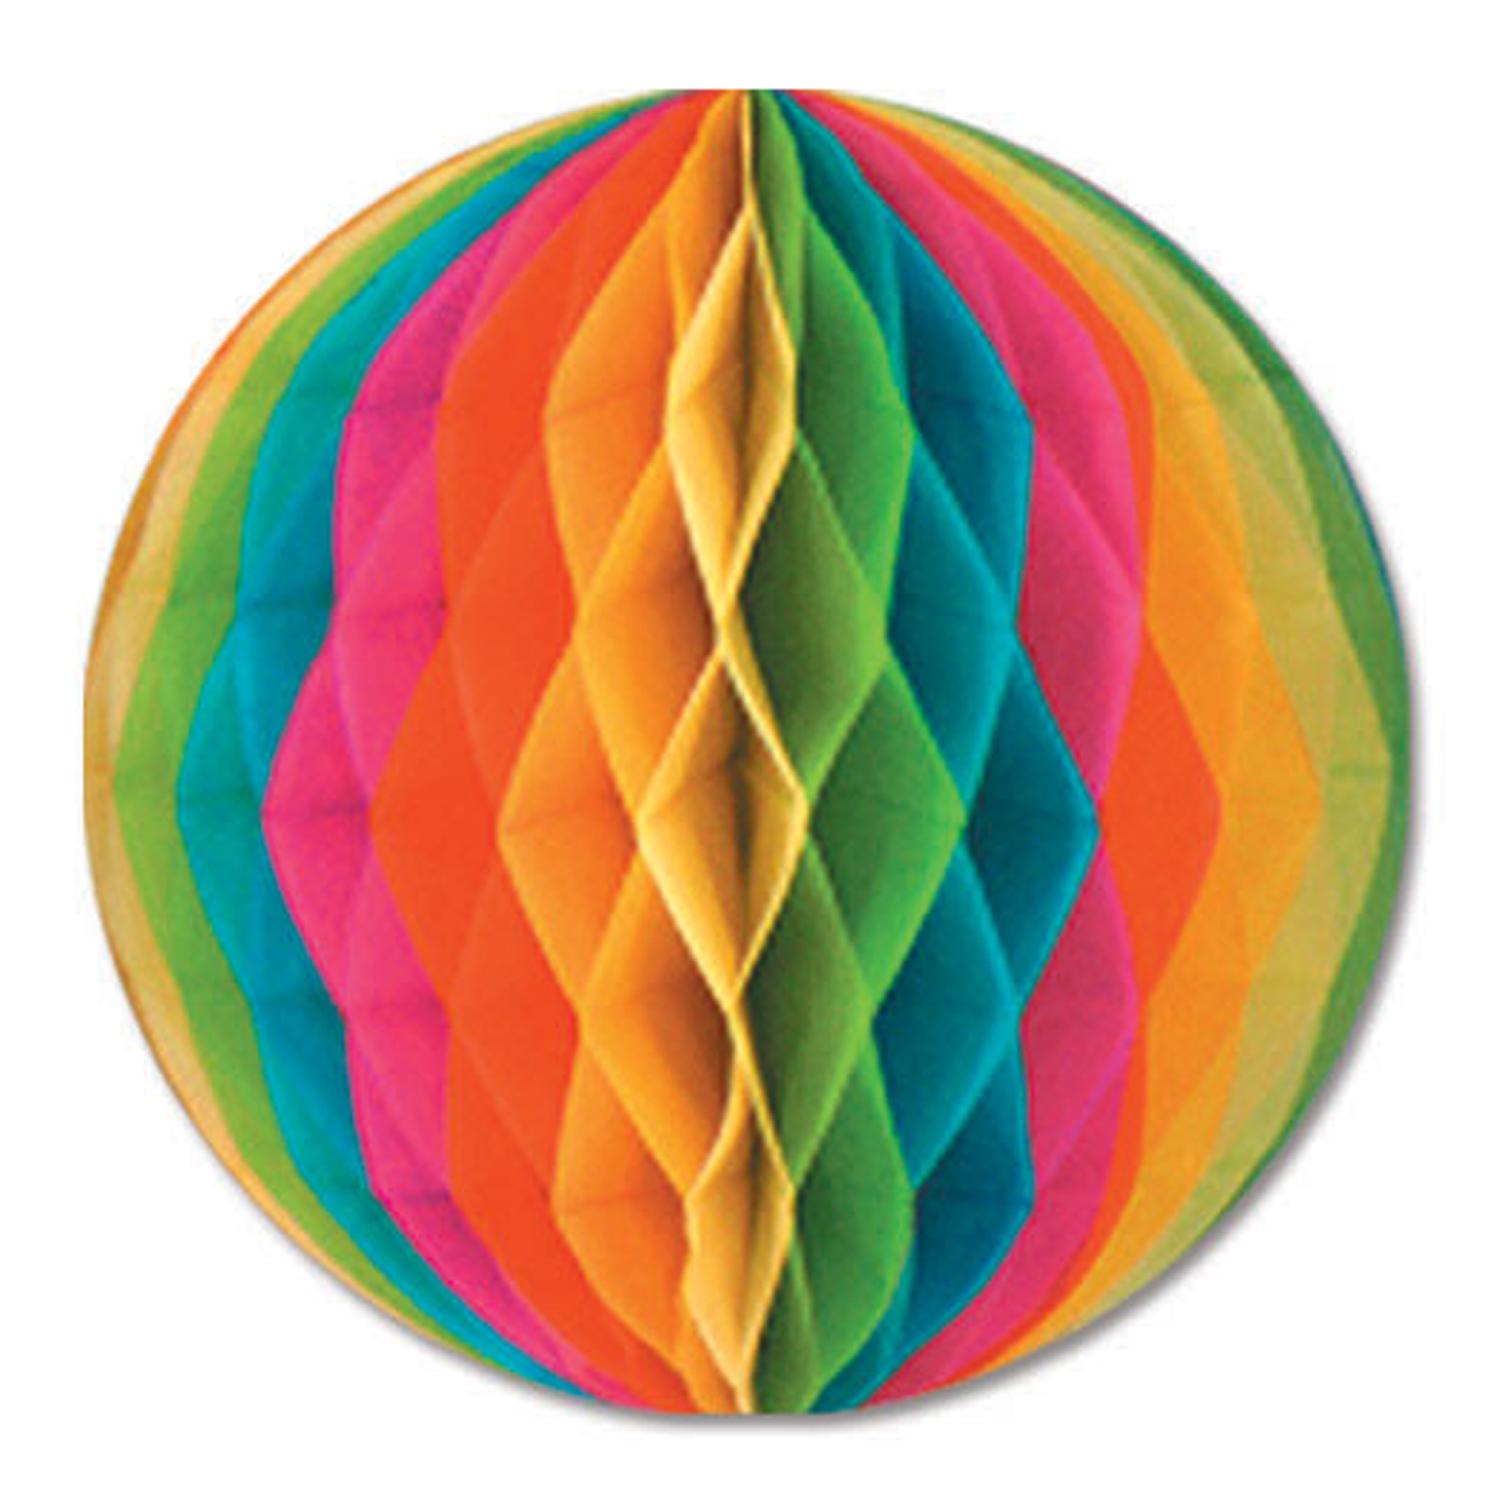 Beistle Party Tissue Ball - multi-color